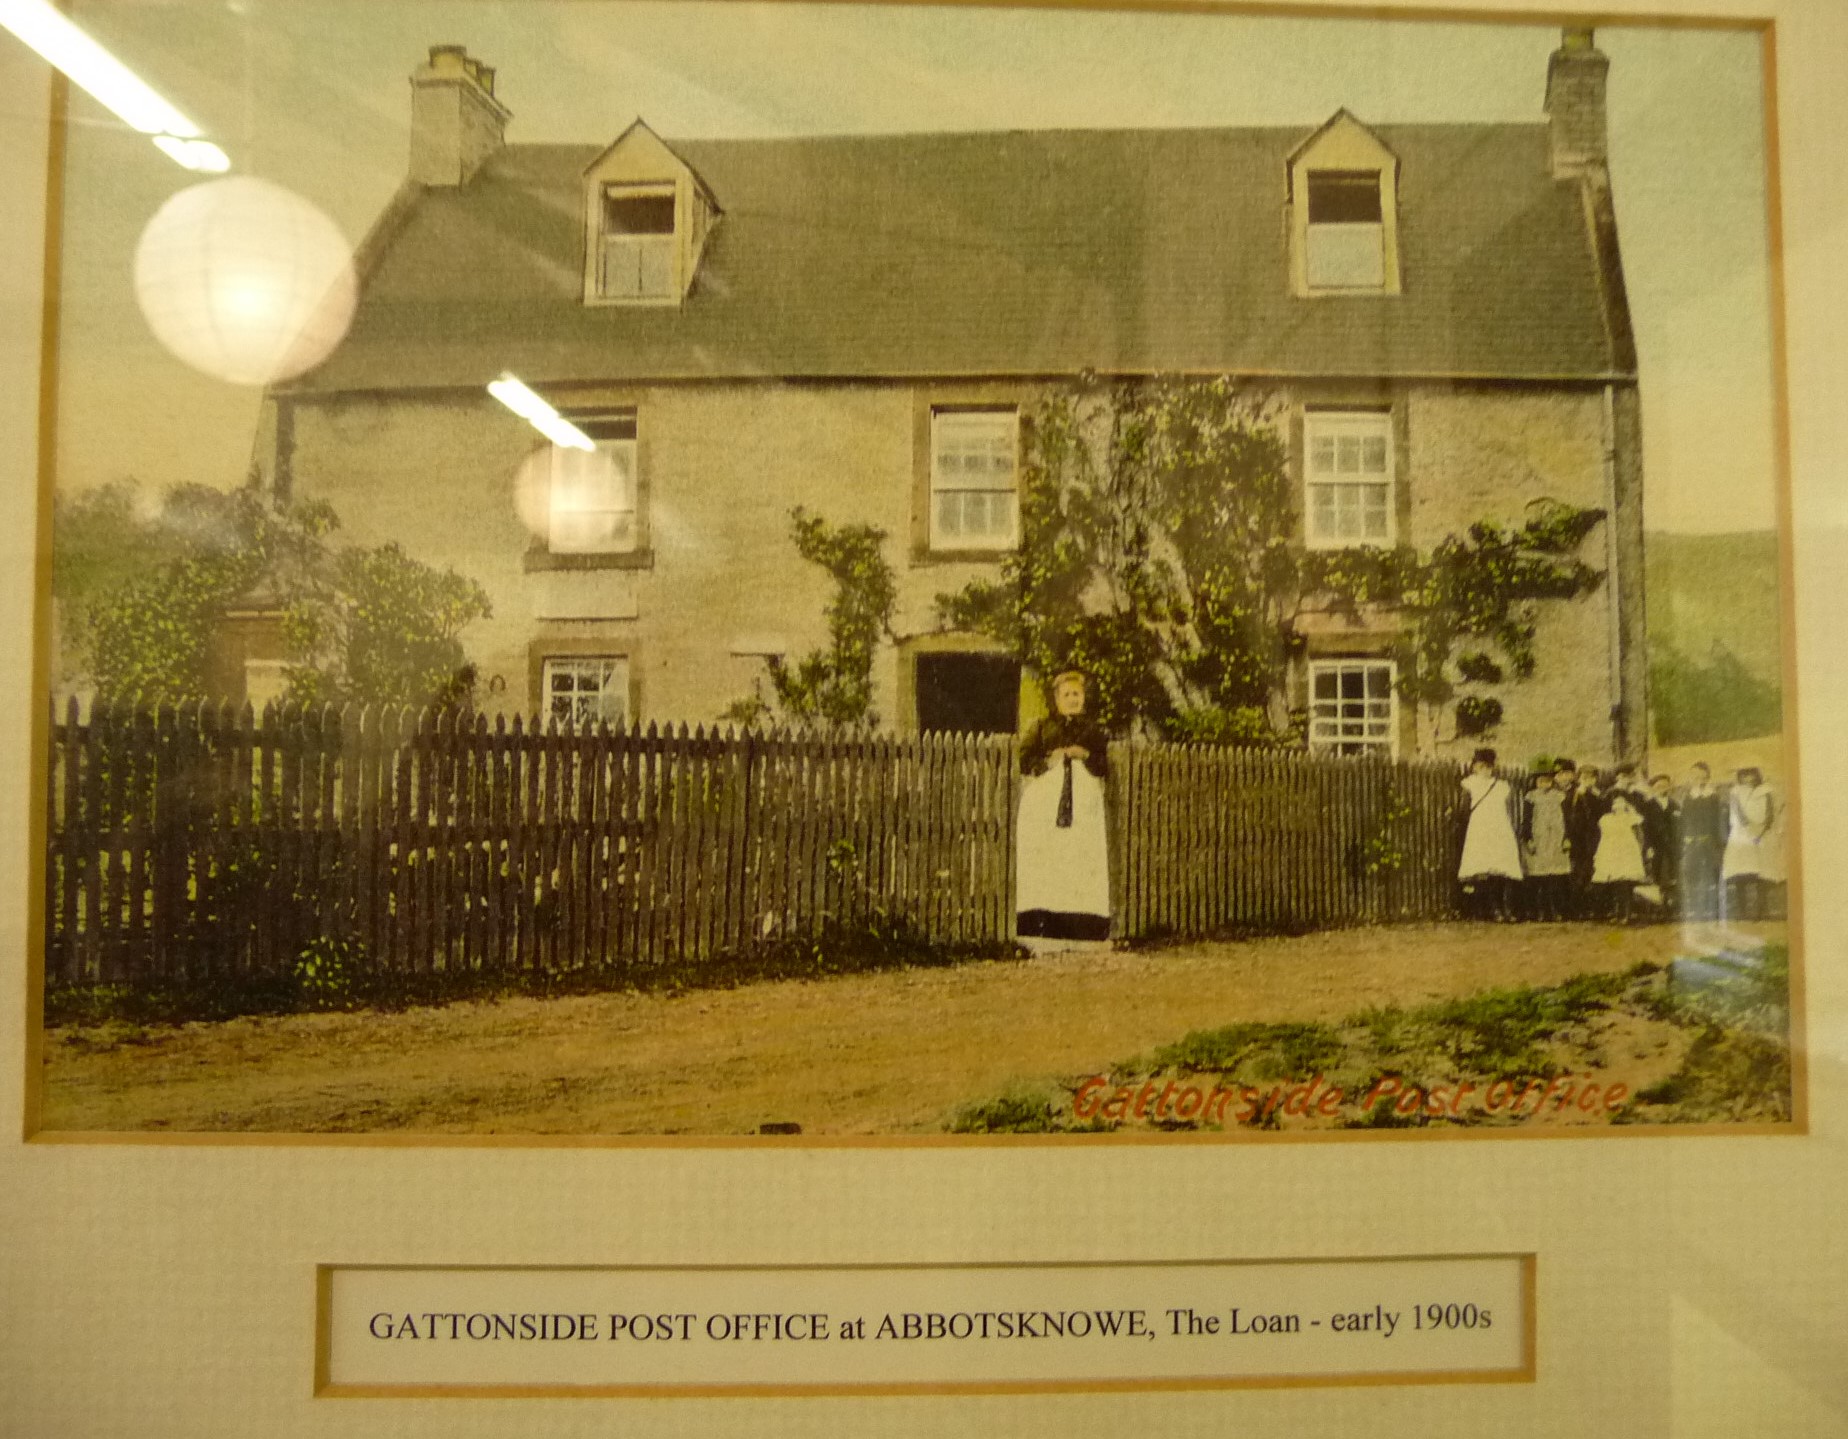 Hopkirk Home and Gattonside Post Office 1900